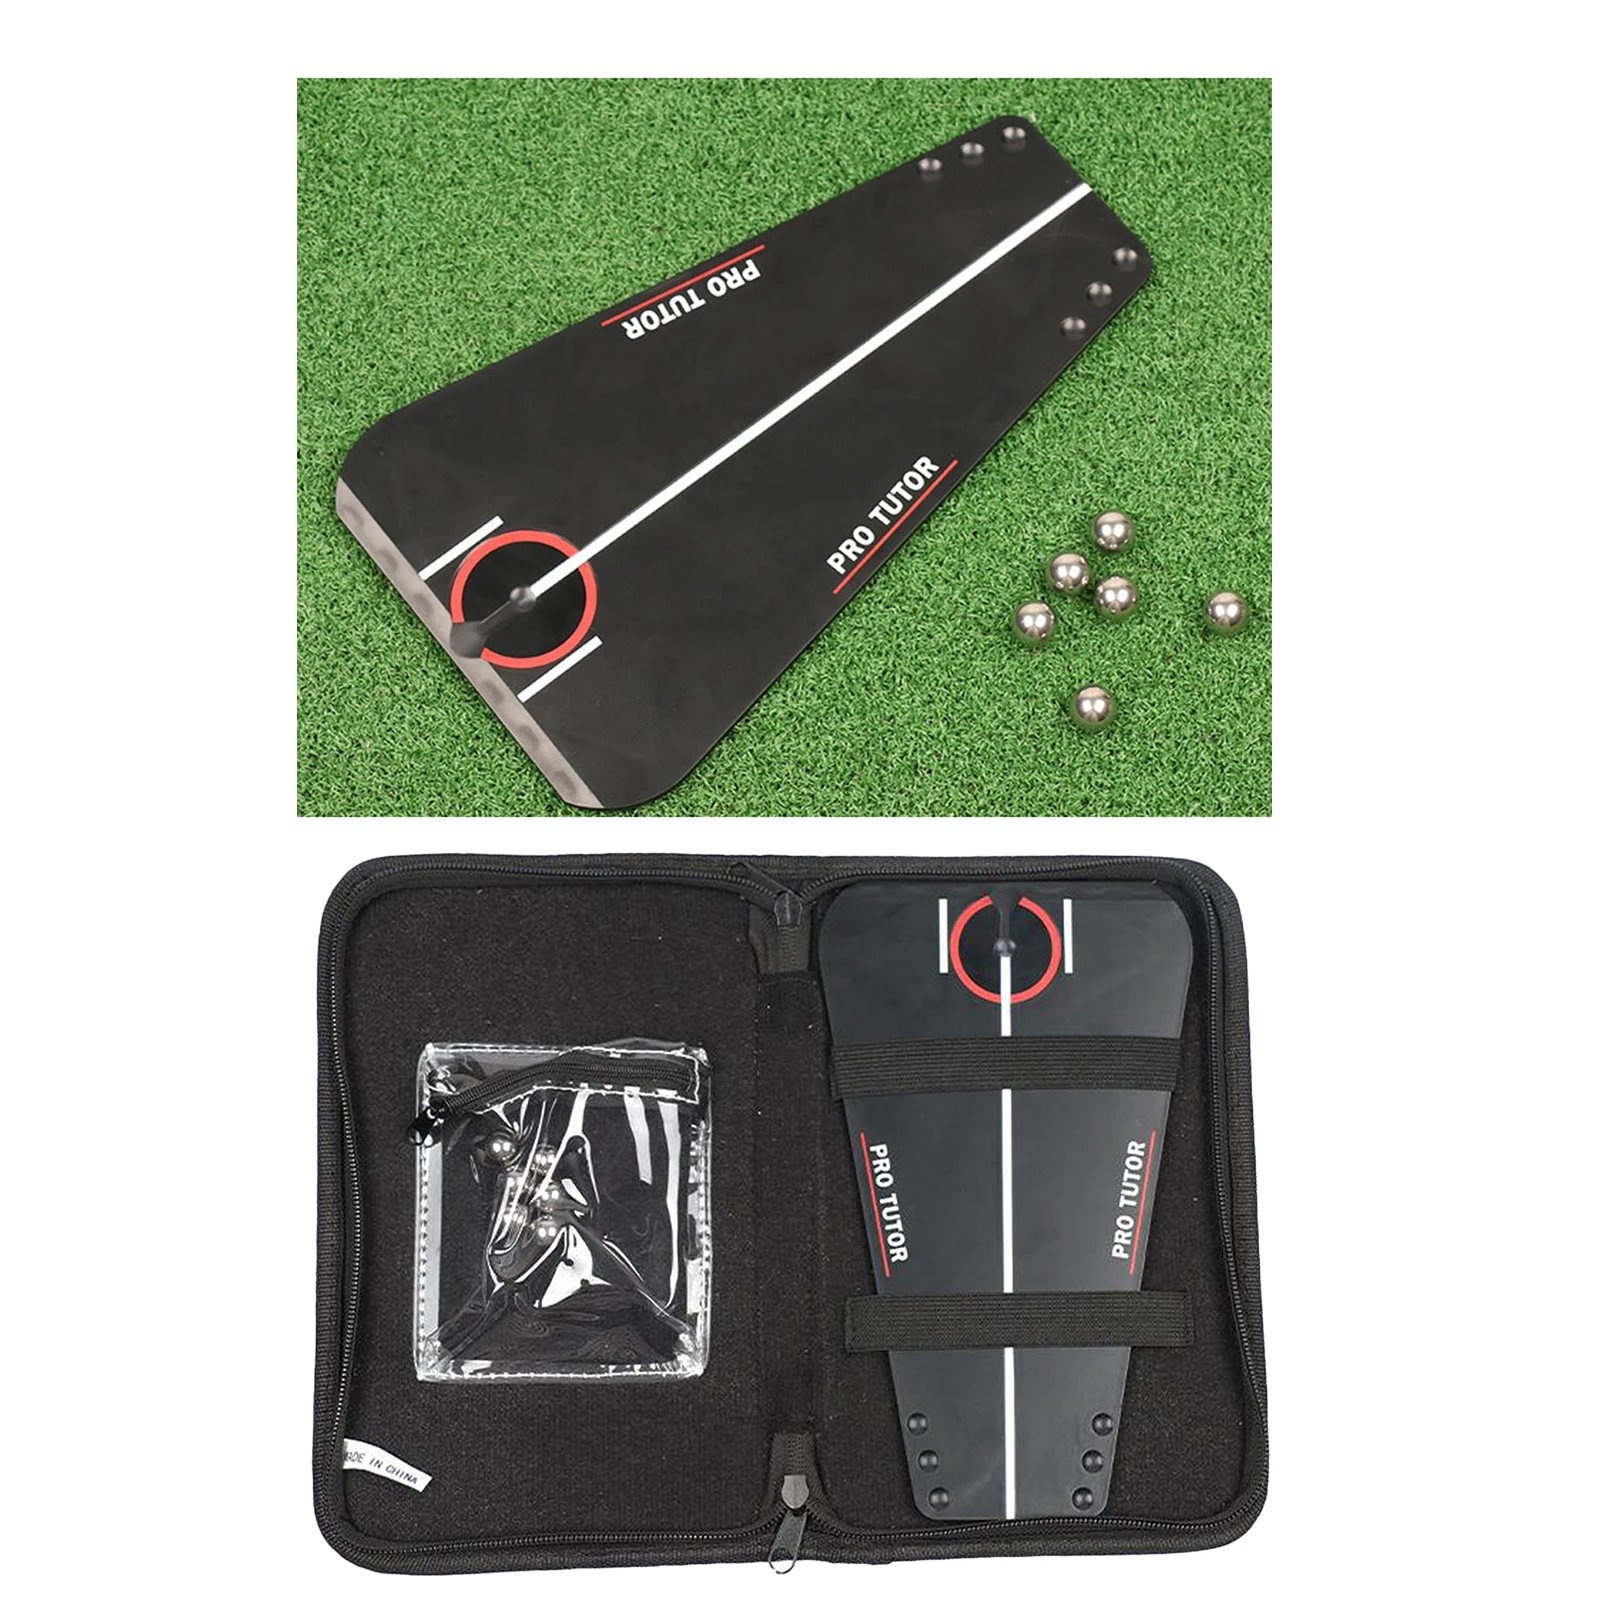 Portable Golf Putting Training Aid Alignment Swing Trainer Golf Swing Straight Practice Eye Line Golf Accessories